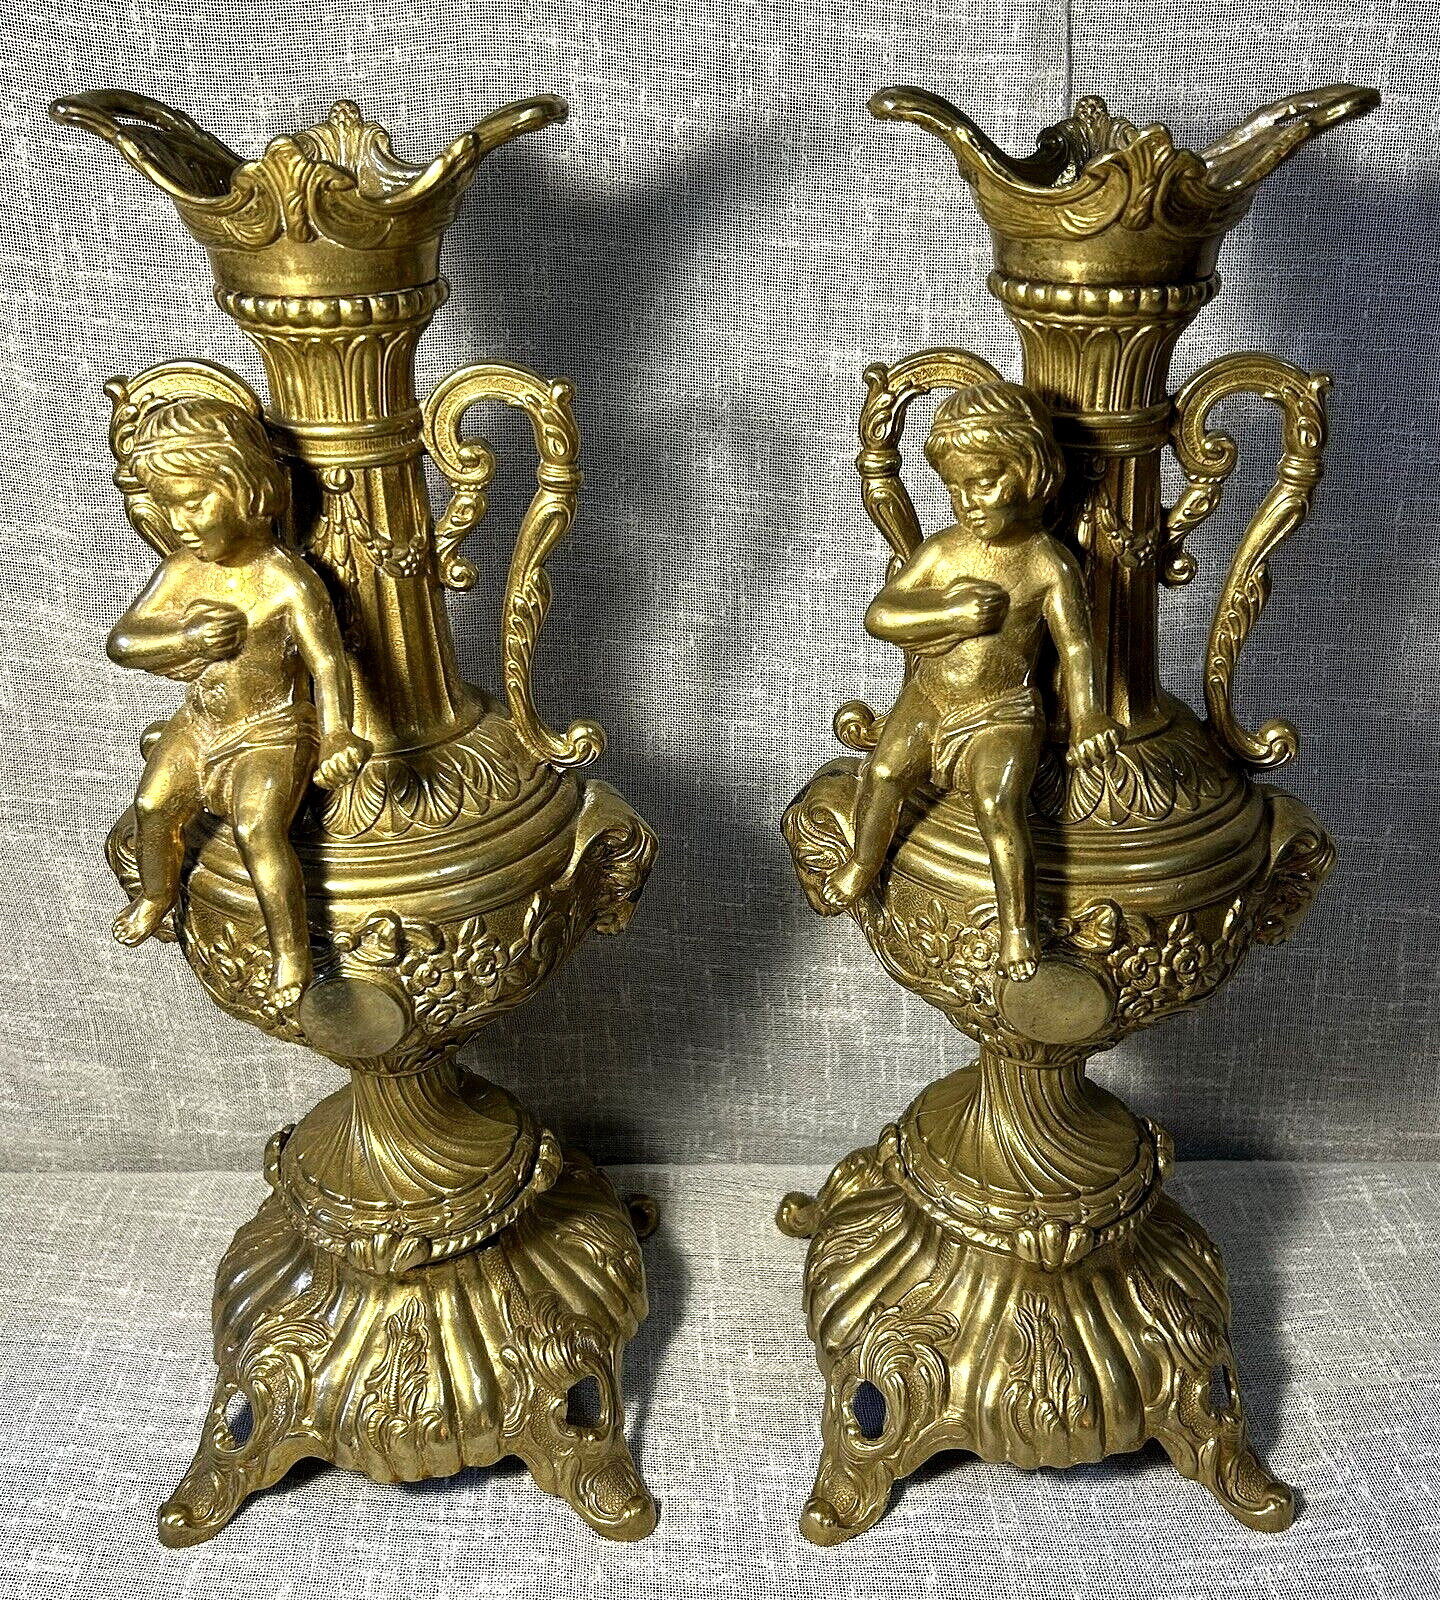 Pair Antique/Vintage Italian Solid Brass Decorative Mantel Urns Candle Holders